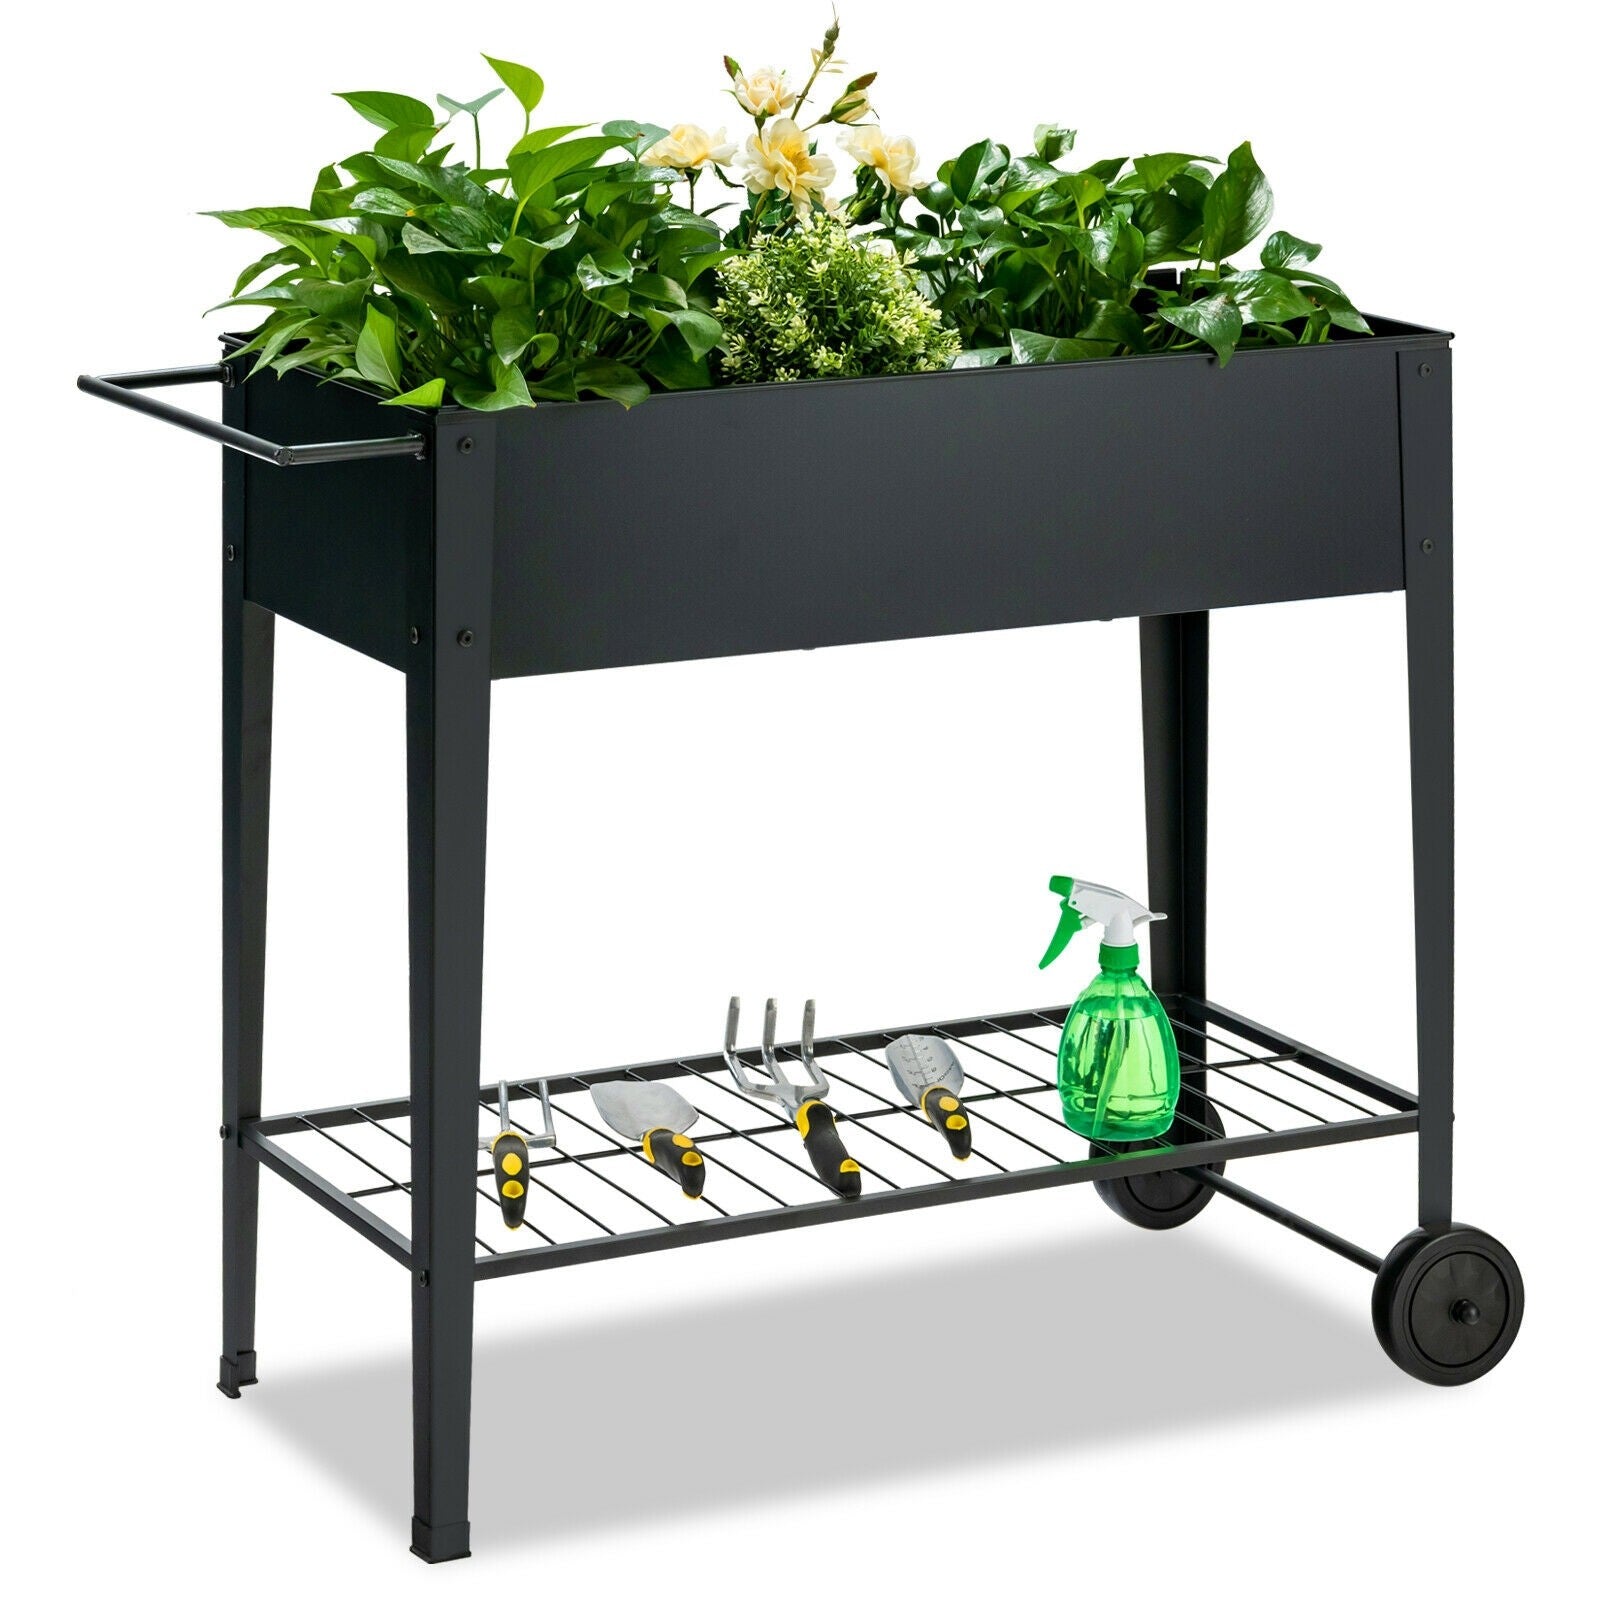 Outdoor Raised Garden Bed on Wheels with Legs